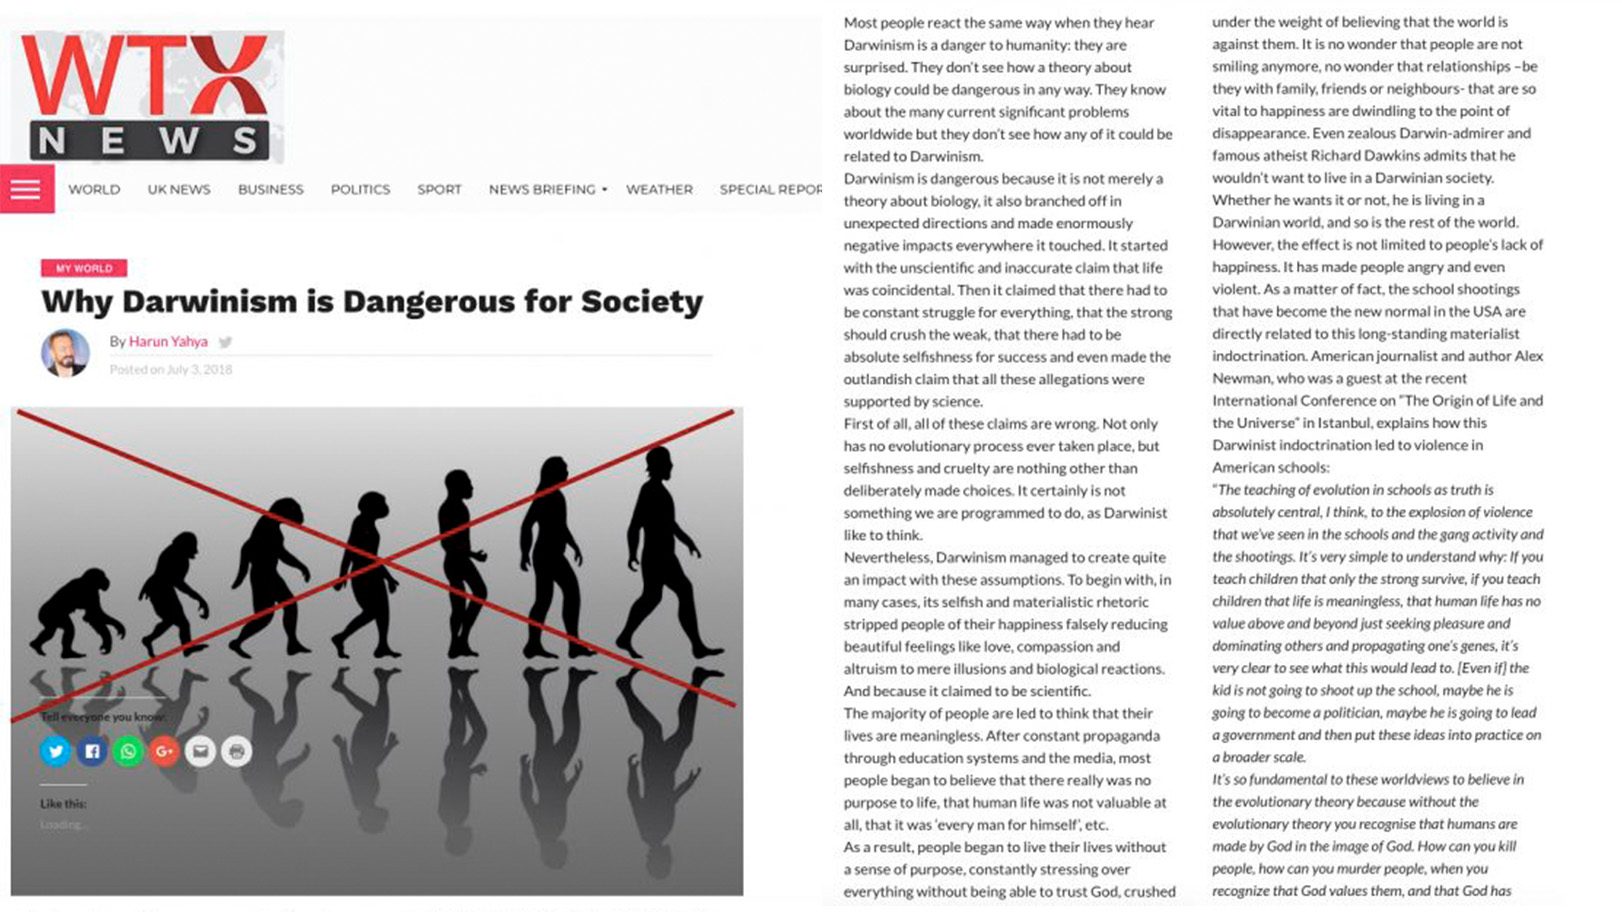 Why Darwinism is Dangerous for Society